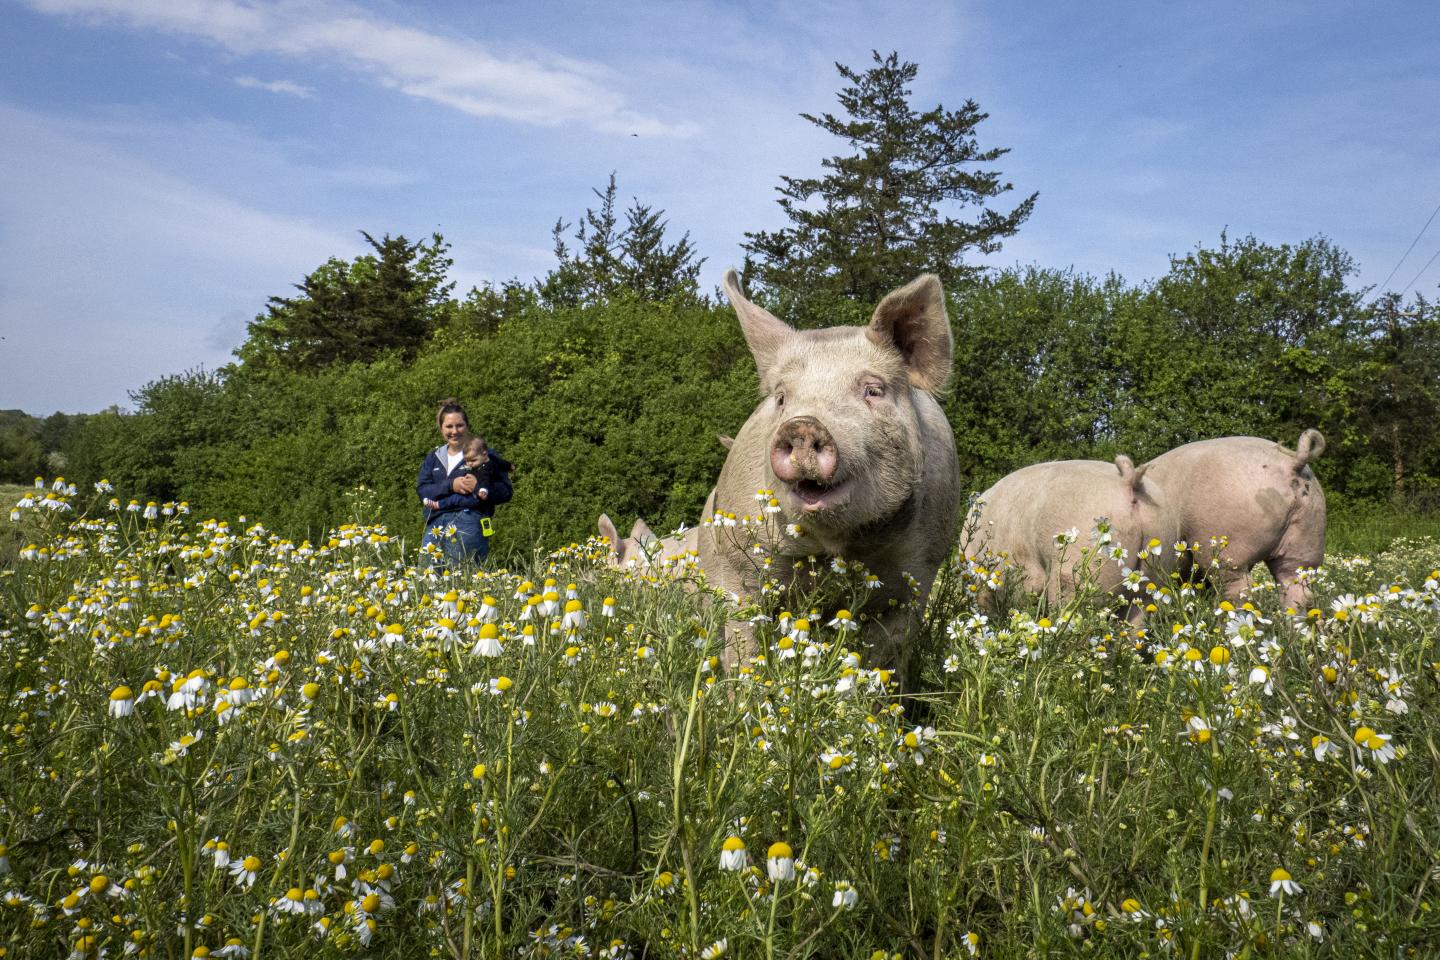 Several pigs stand in a field filled with wildflowers.